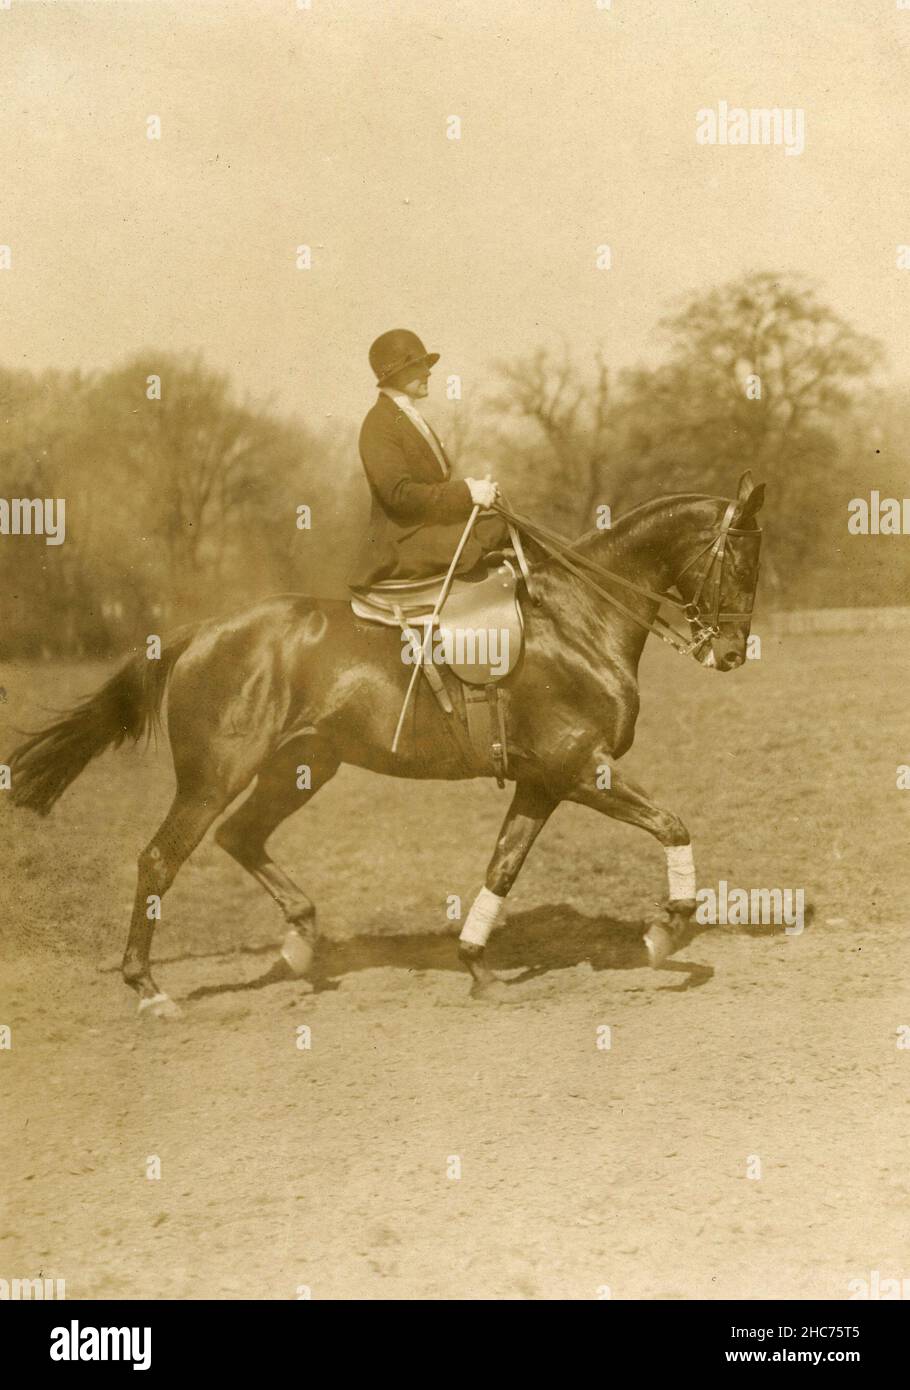 Woman riding a horse sidesaddle, Italy 1920s Stock Photo